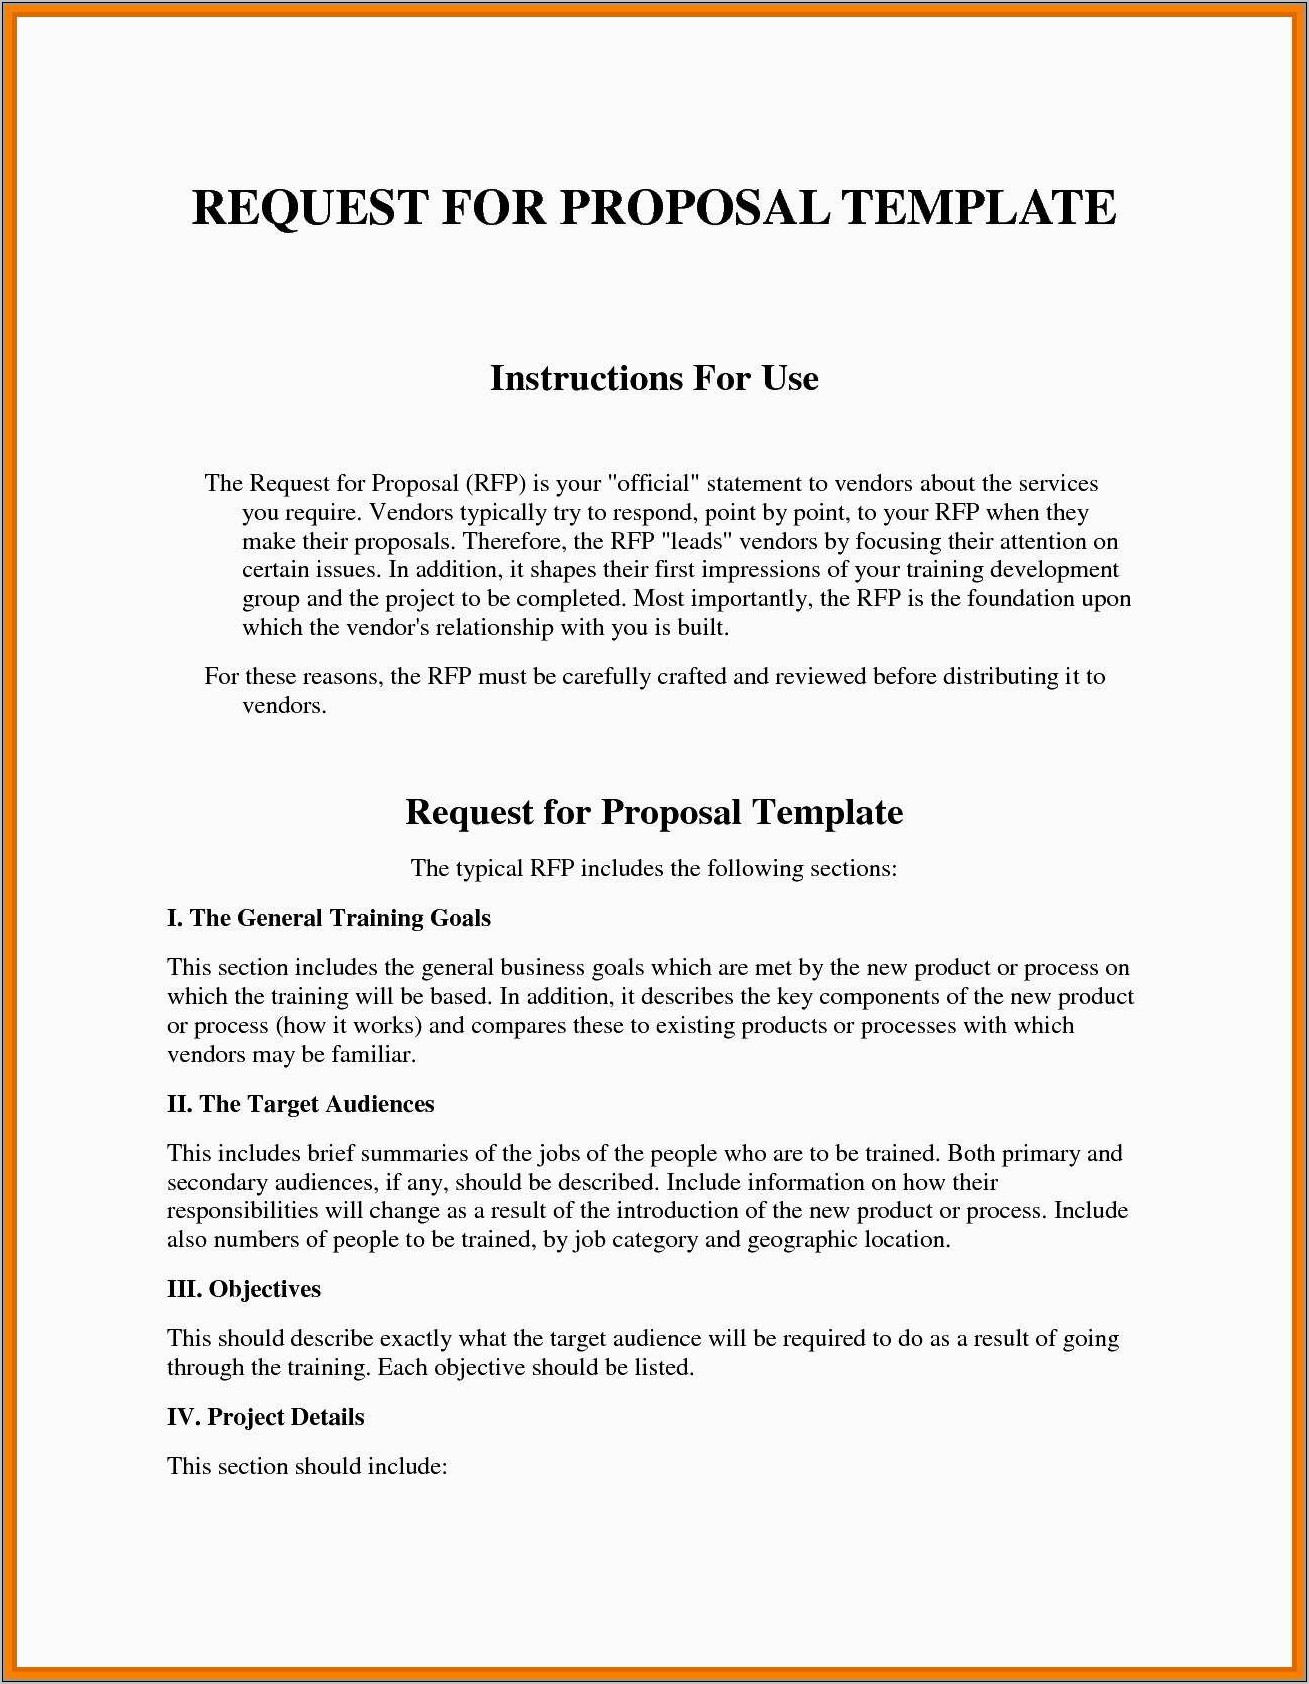 Proposal Template For Rfp Response